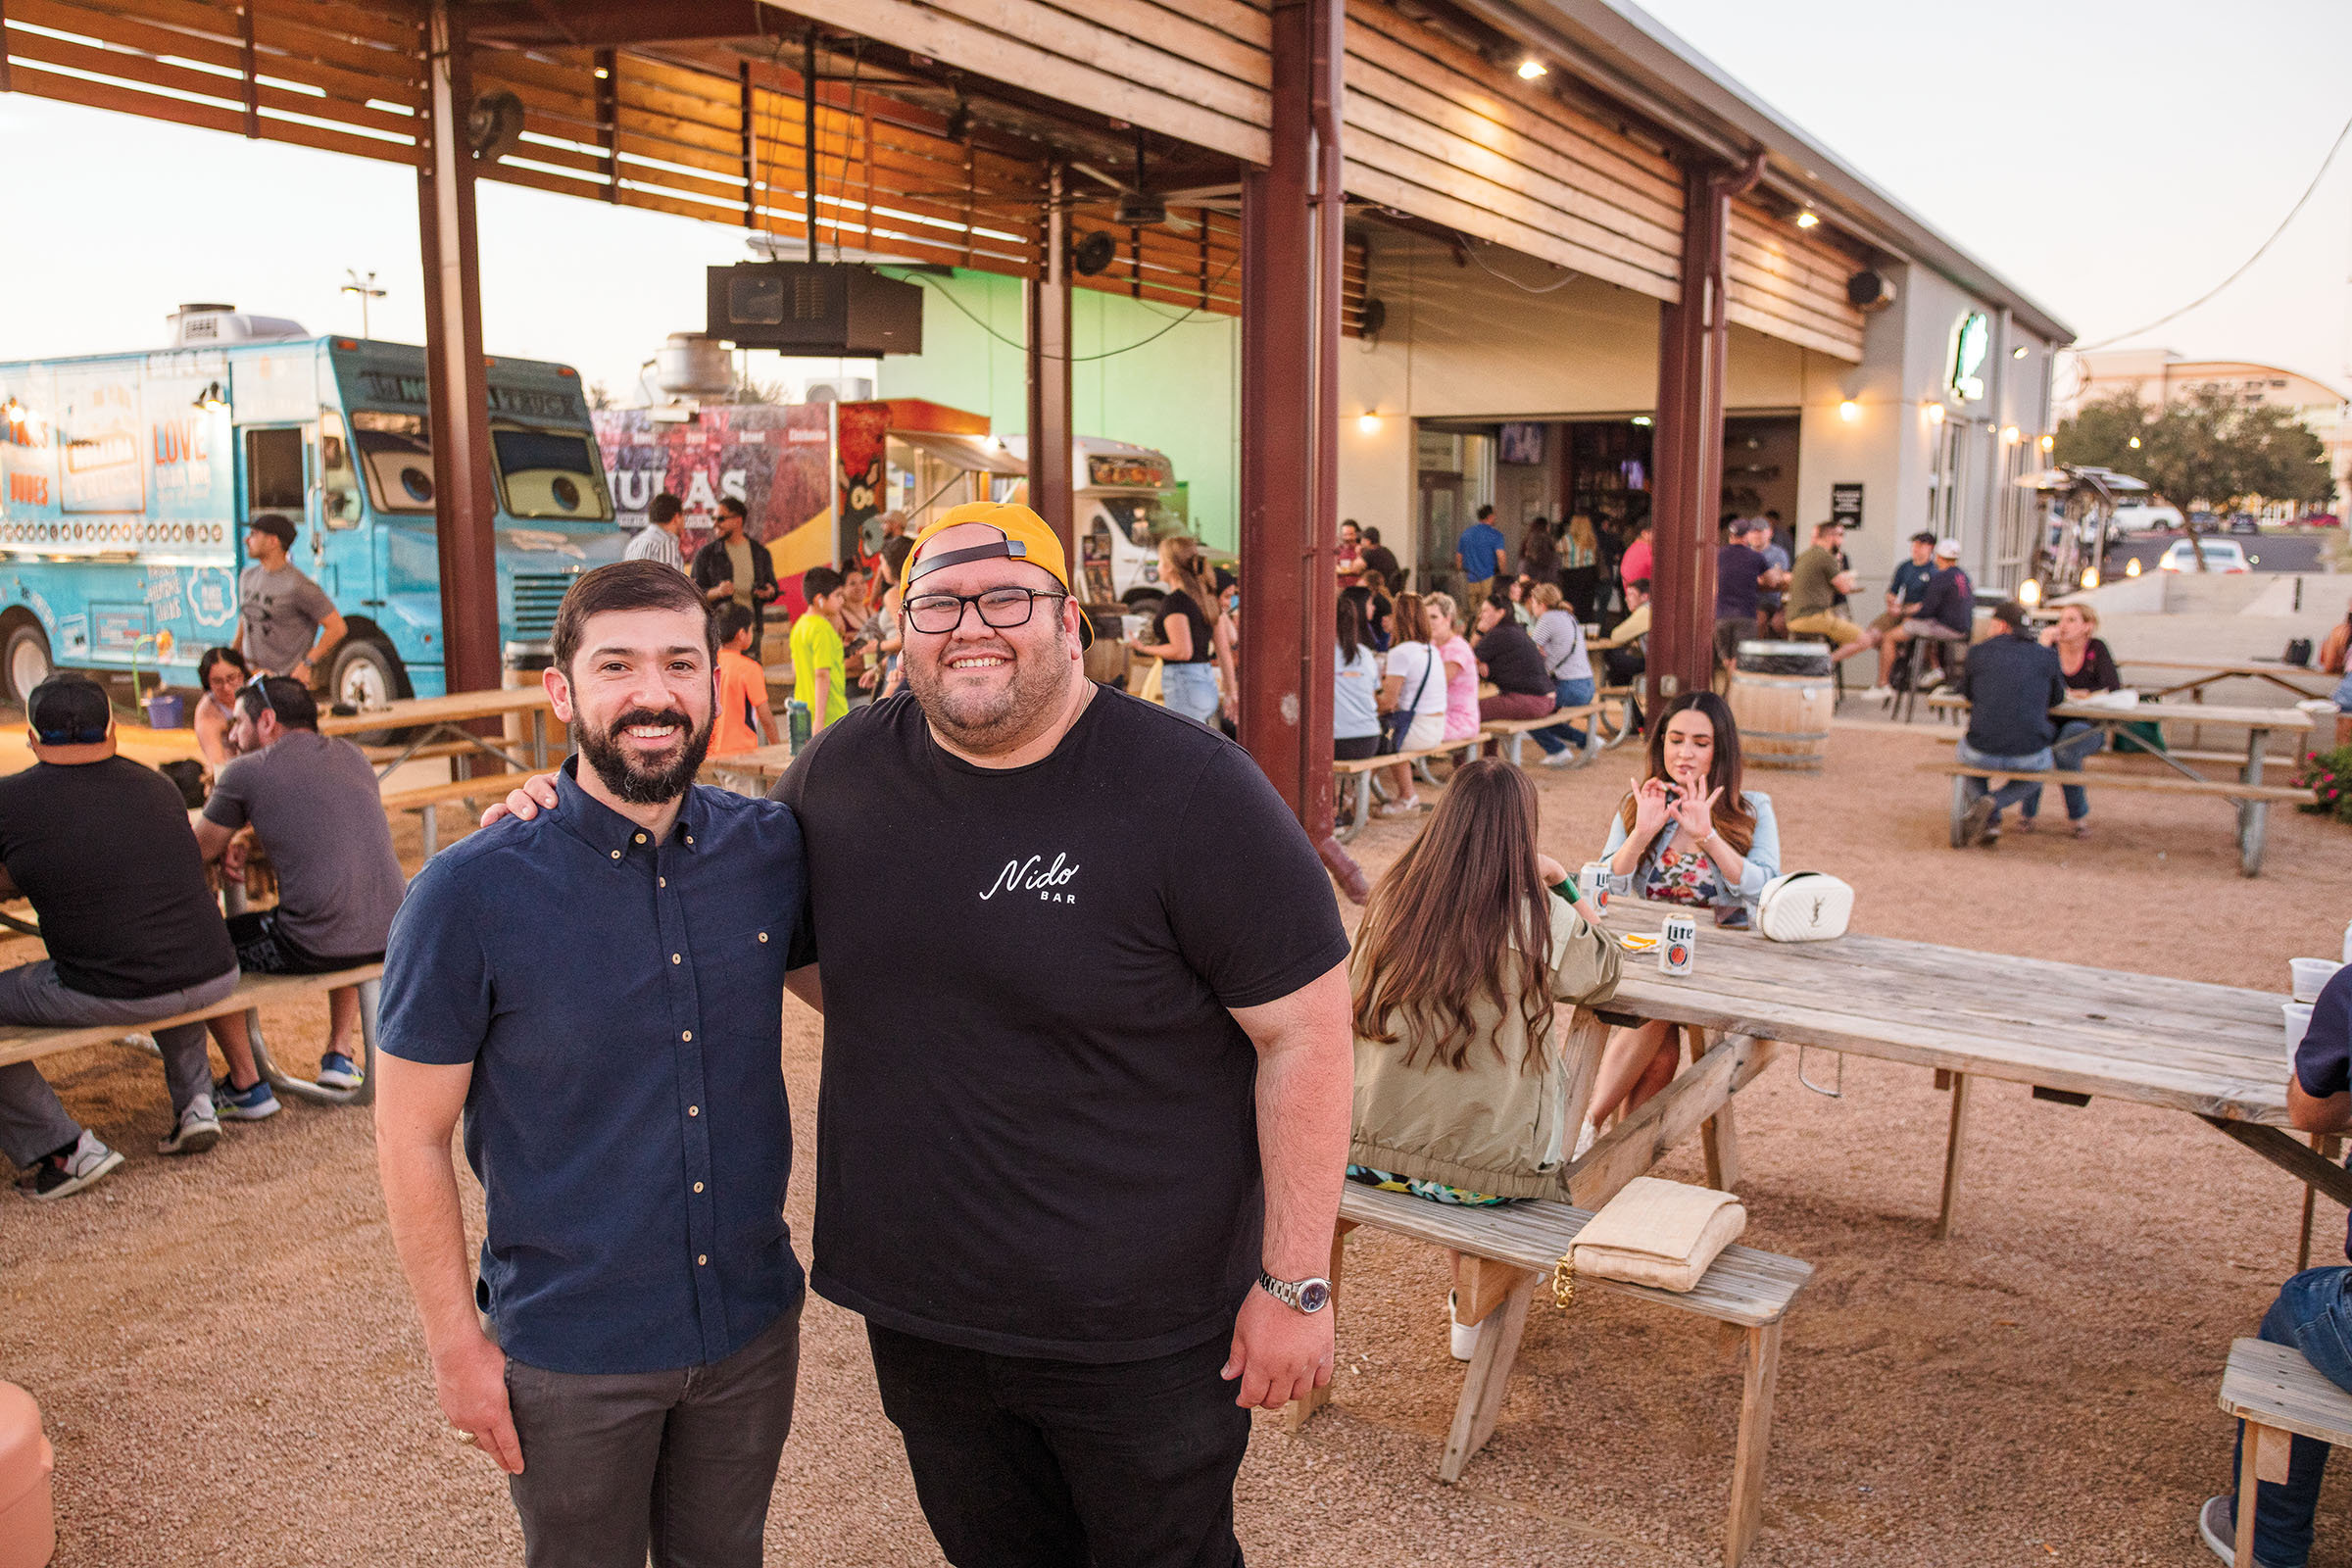 Two men stand in a dirt-floored food court with several food trucks nearby